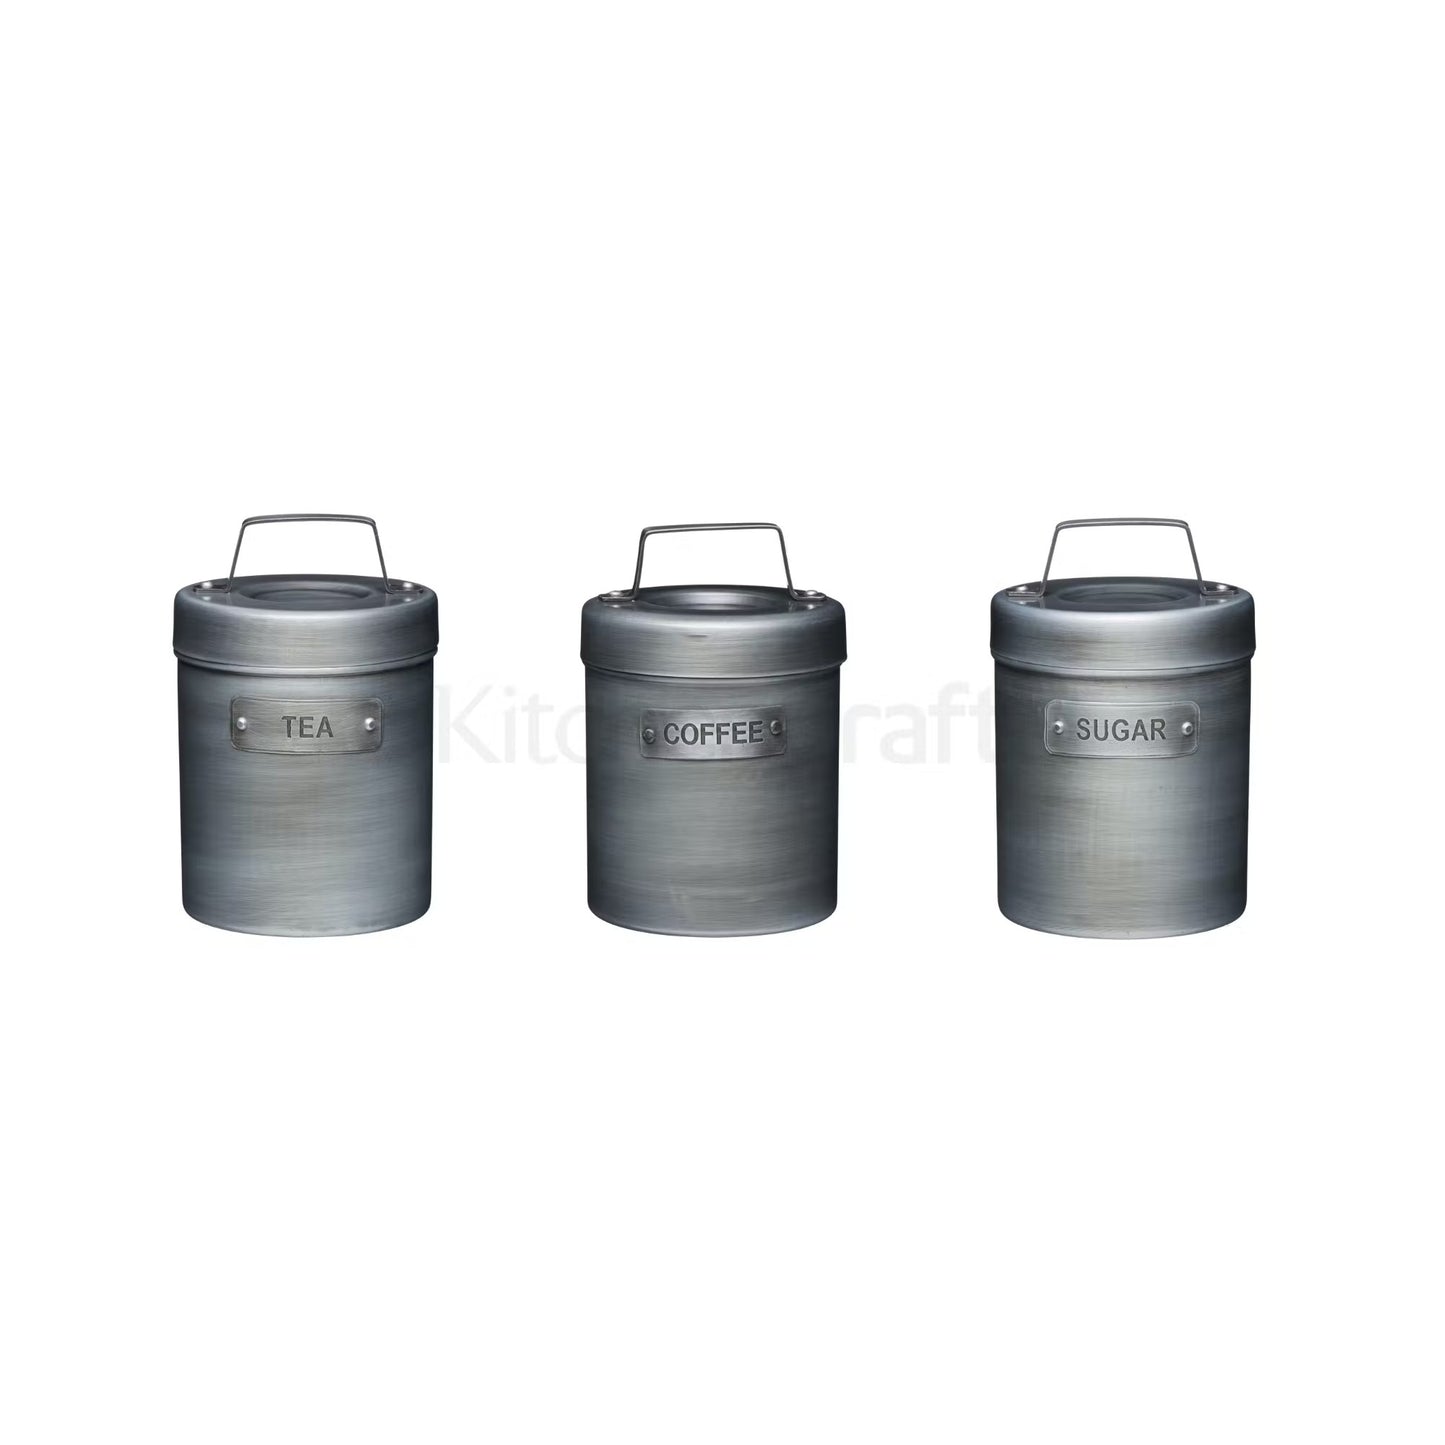 KitchenCraft Industrial Kitchen Tea/Coffee/Sugar Canisters INDTCSSET